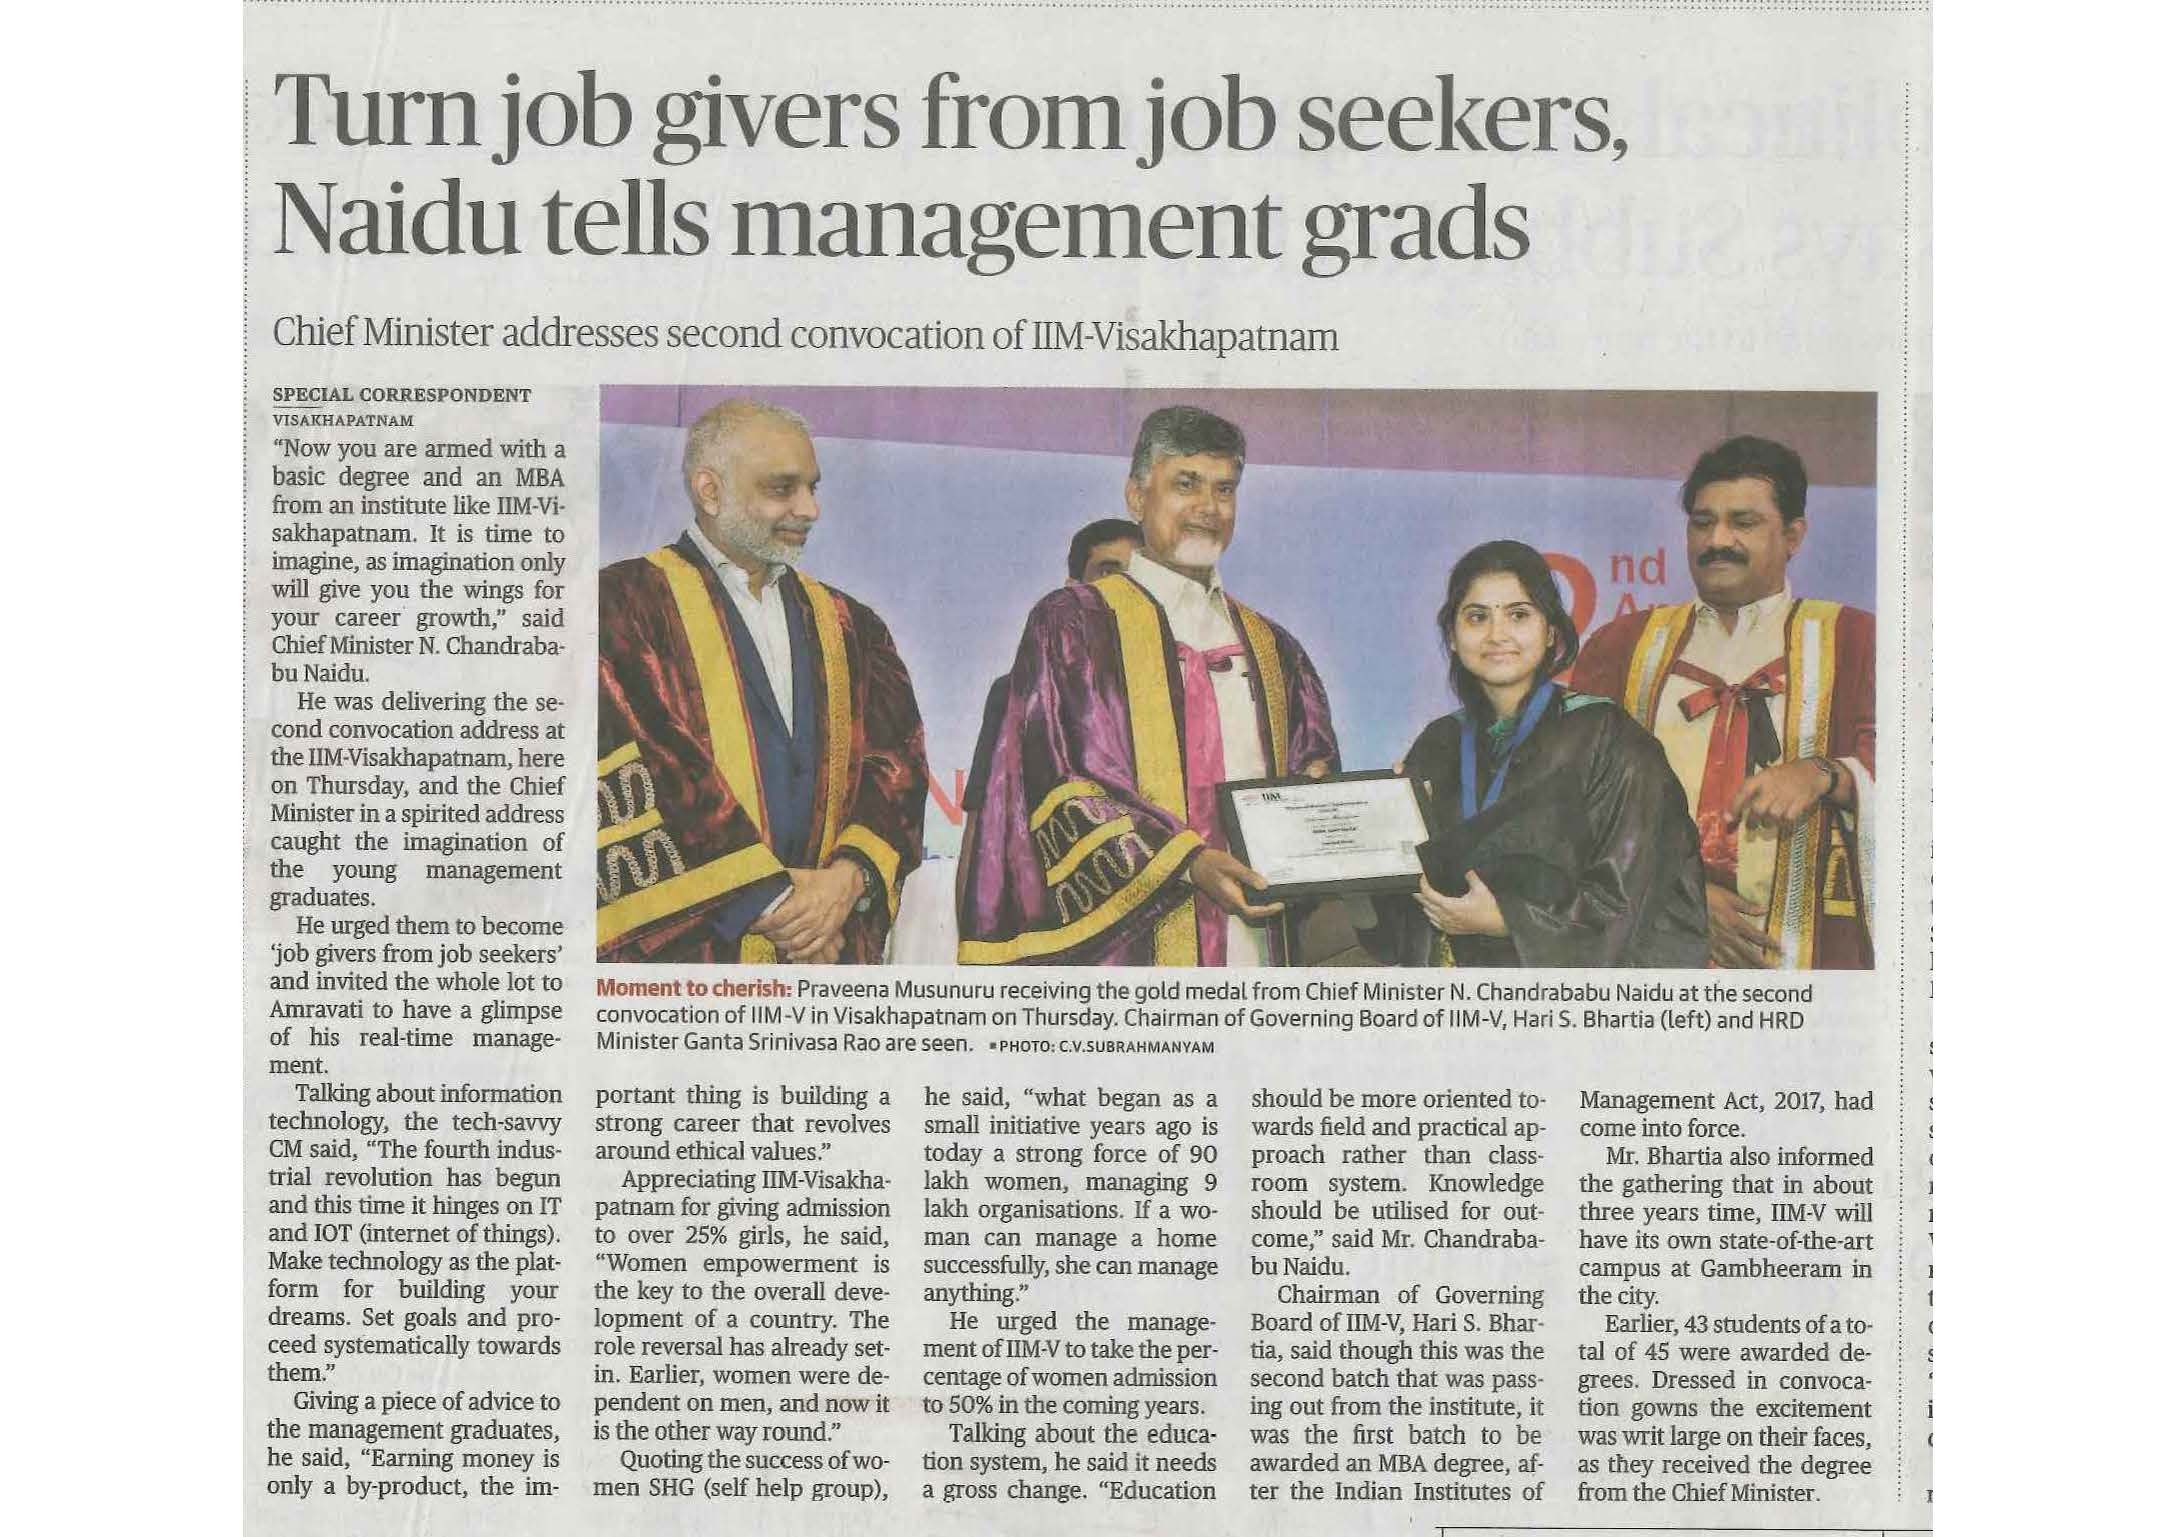 In a first in the region, students of IIM-Vizag awarded MBA degrees instead of diplomas - 30.03.2018